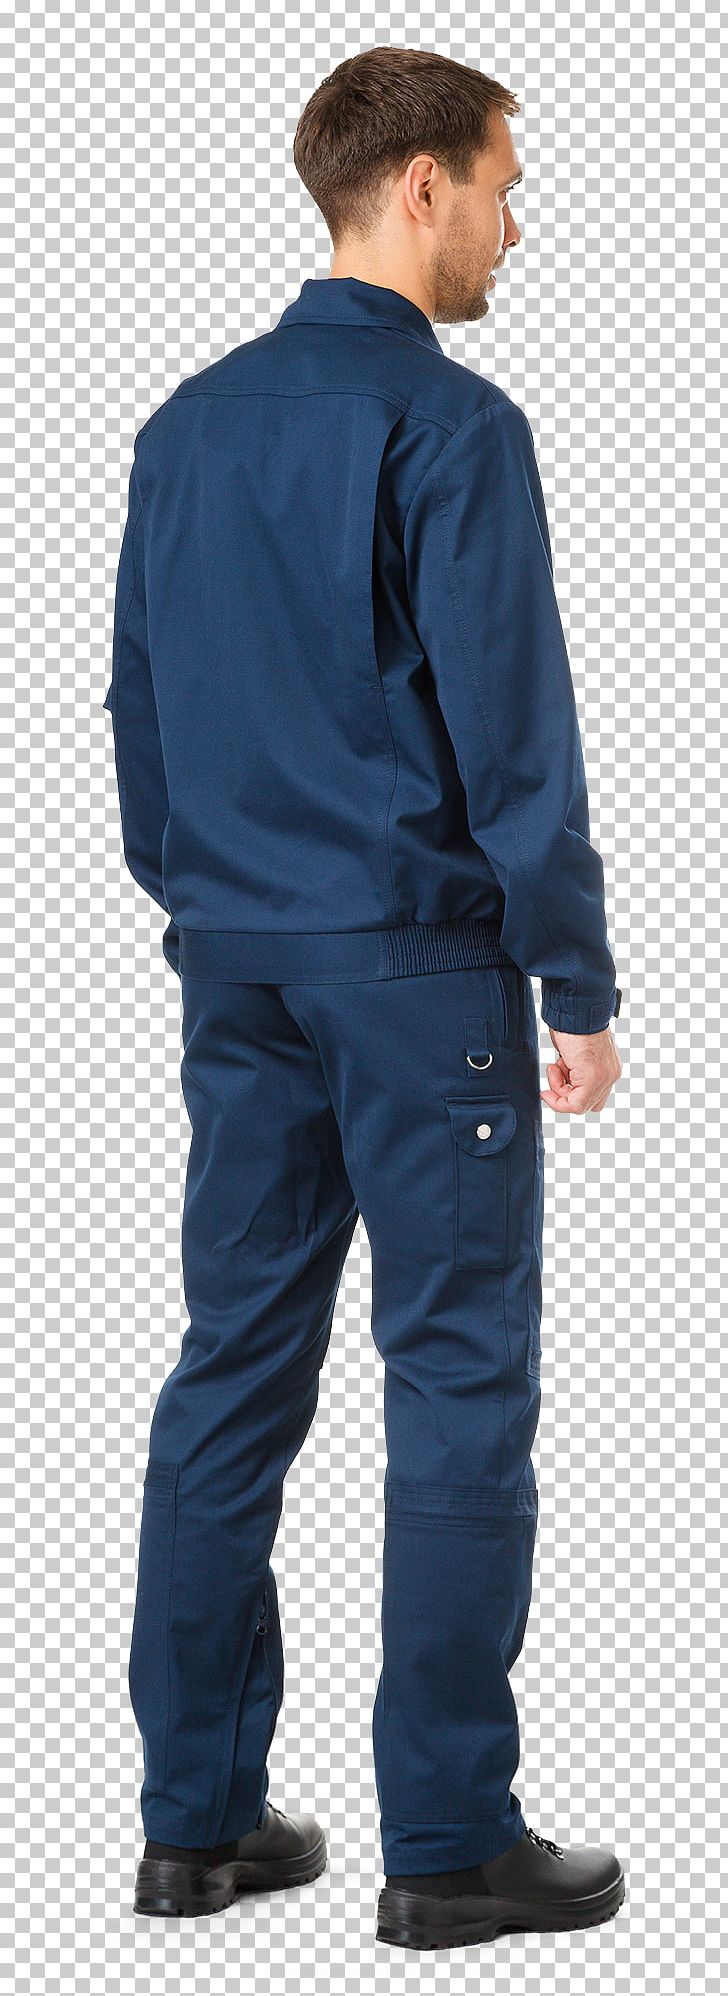 Jeans Waistcoat Jacket Workwear Zipper PNG, Clipart, Blue, Boy, Button, Cardigan, Clothing Free PNG Download